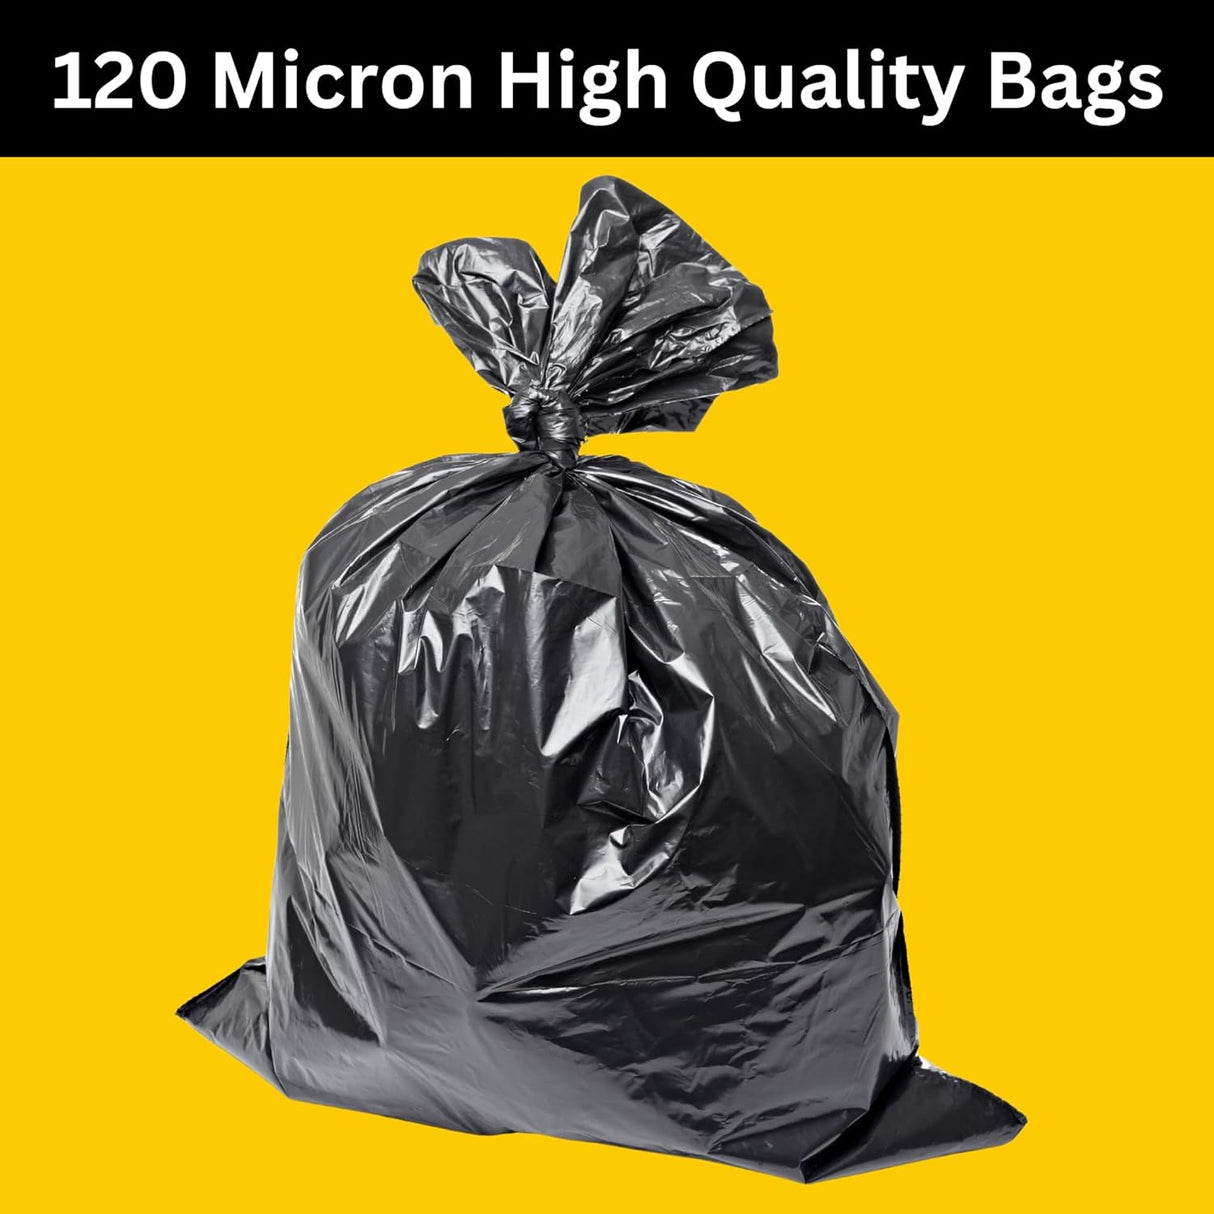 Singhal 120 Micron 18x21 Inch Garbage Bags Pack of 25 Medium Size | Plastic Dustbin Bags | Trash Bags For Kitchen, Office, Warehouse, Restaurant and 5 Star Hotel, Black Trash Bags